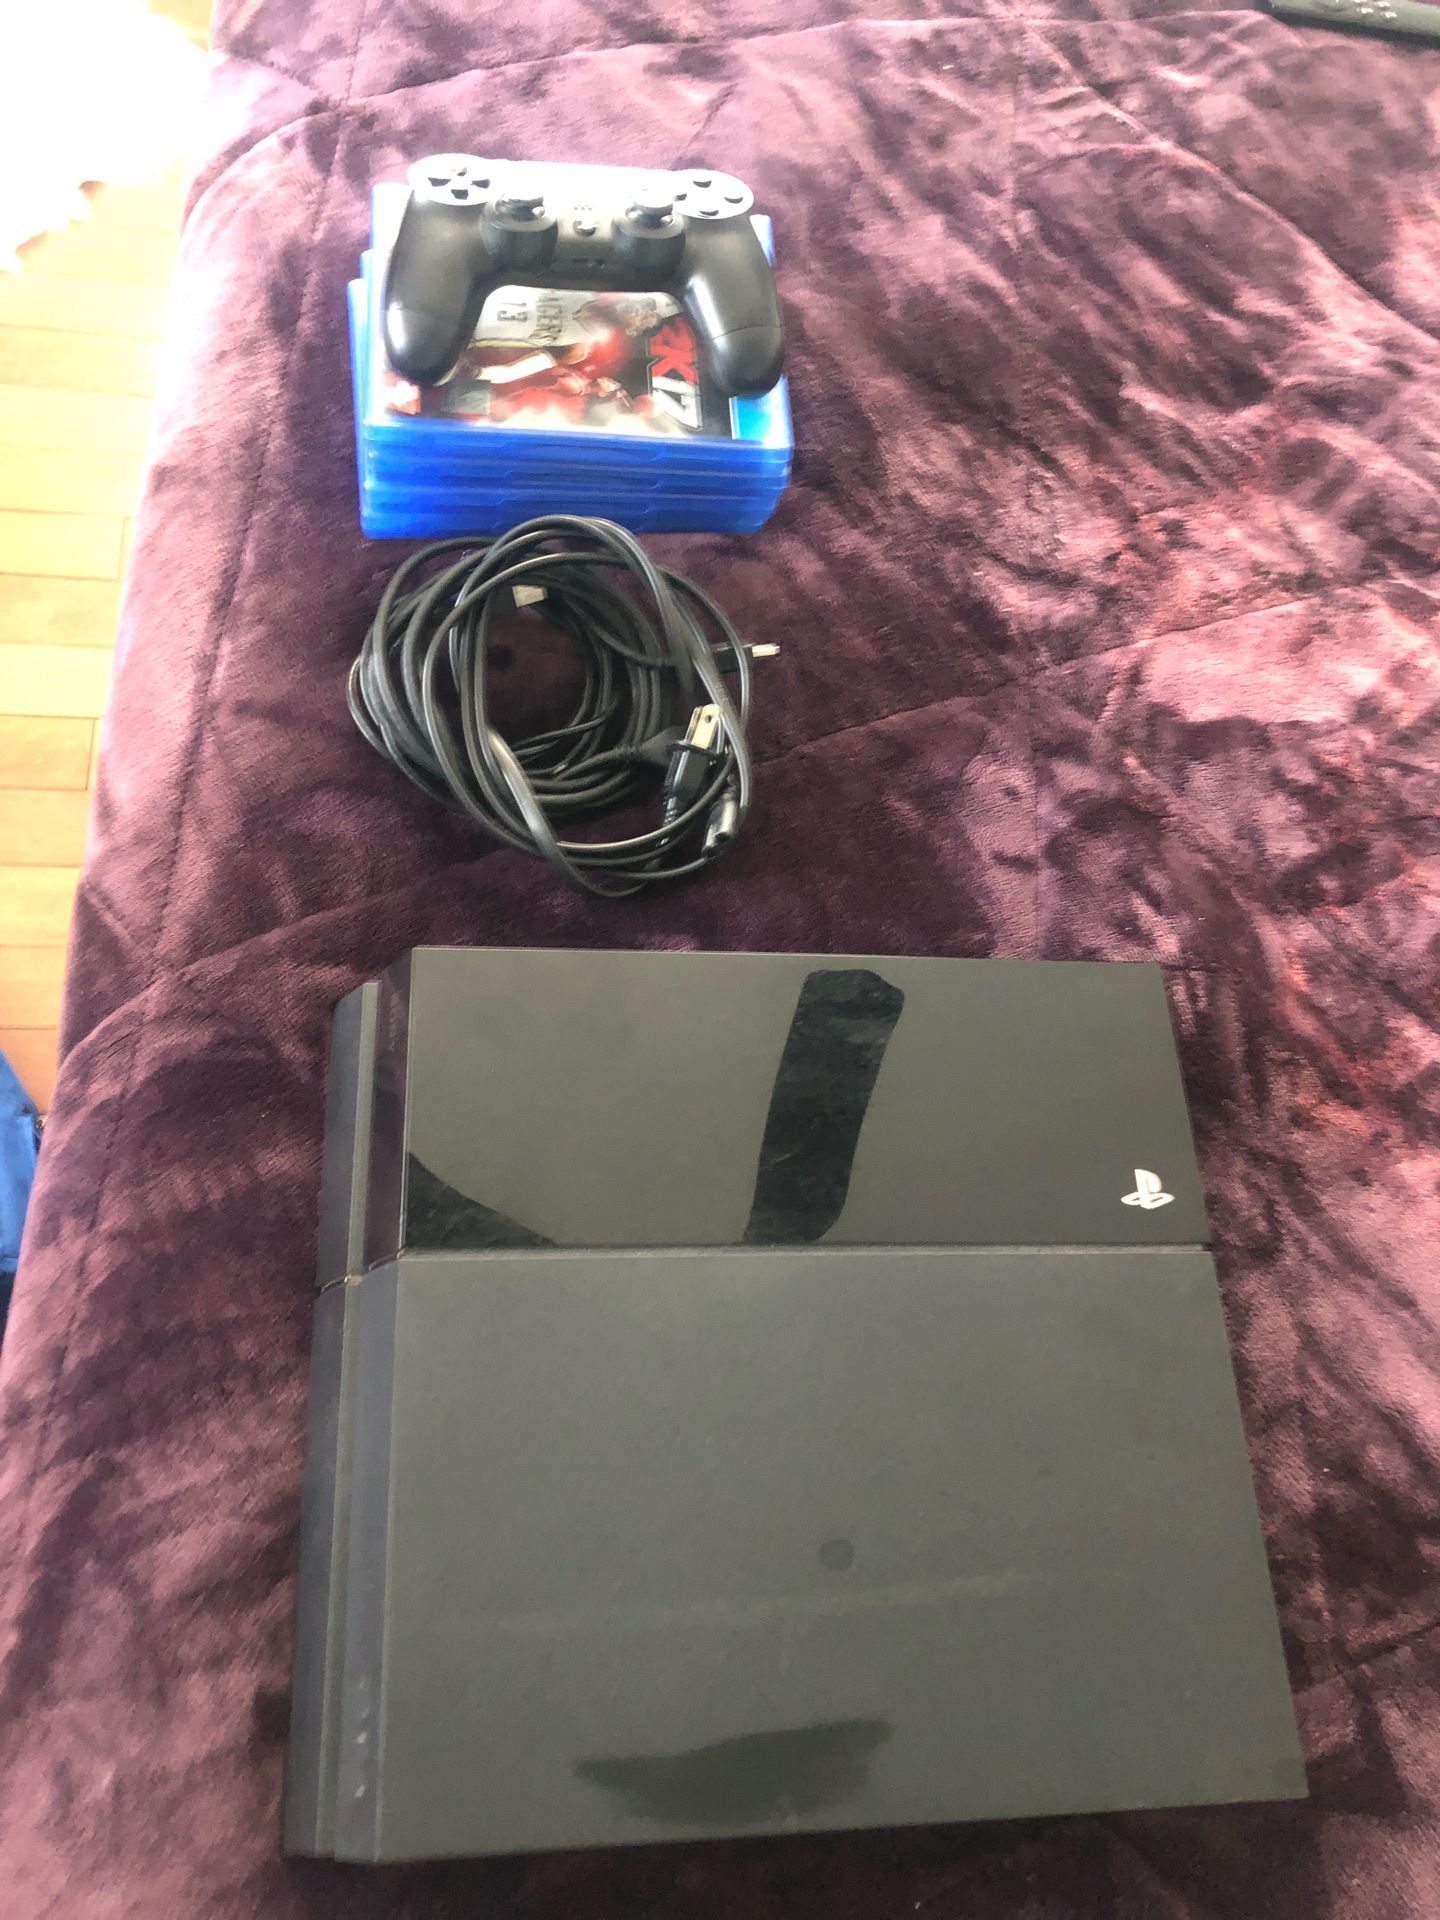 Used PS4 w/ controller, hdmi cord, controller charger, PS4 DC cord